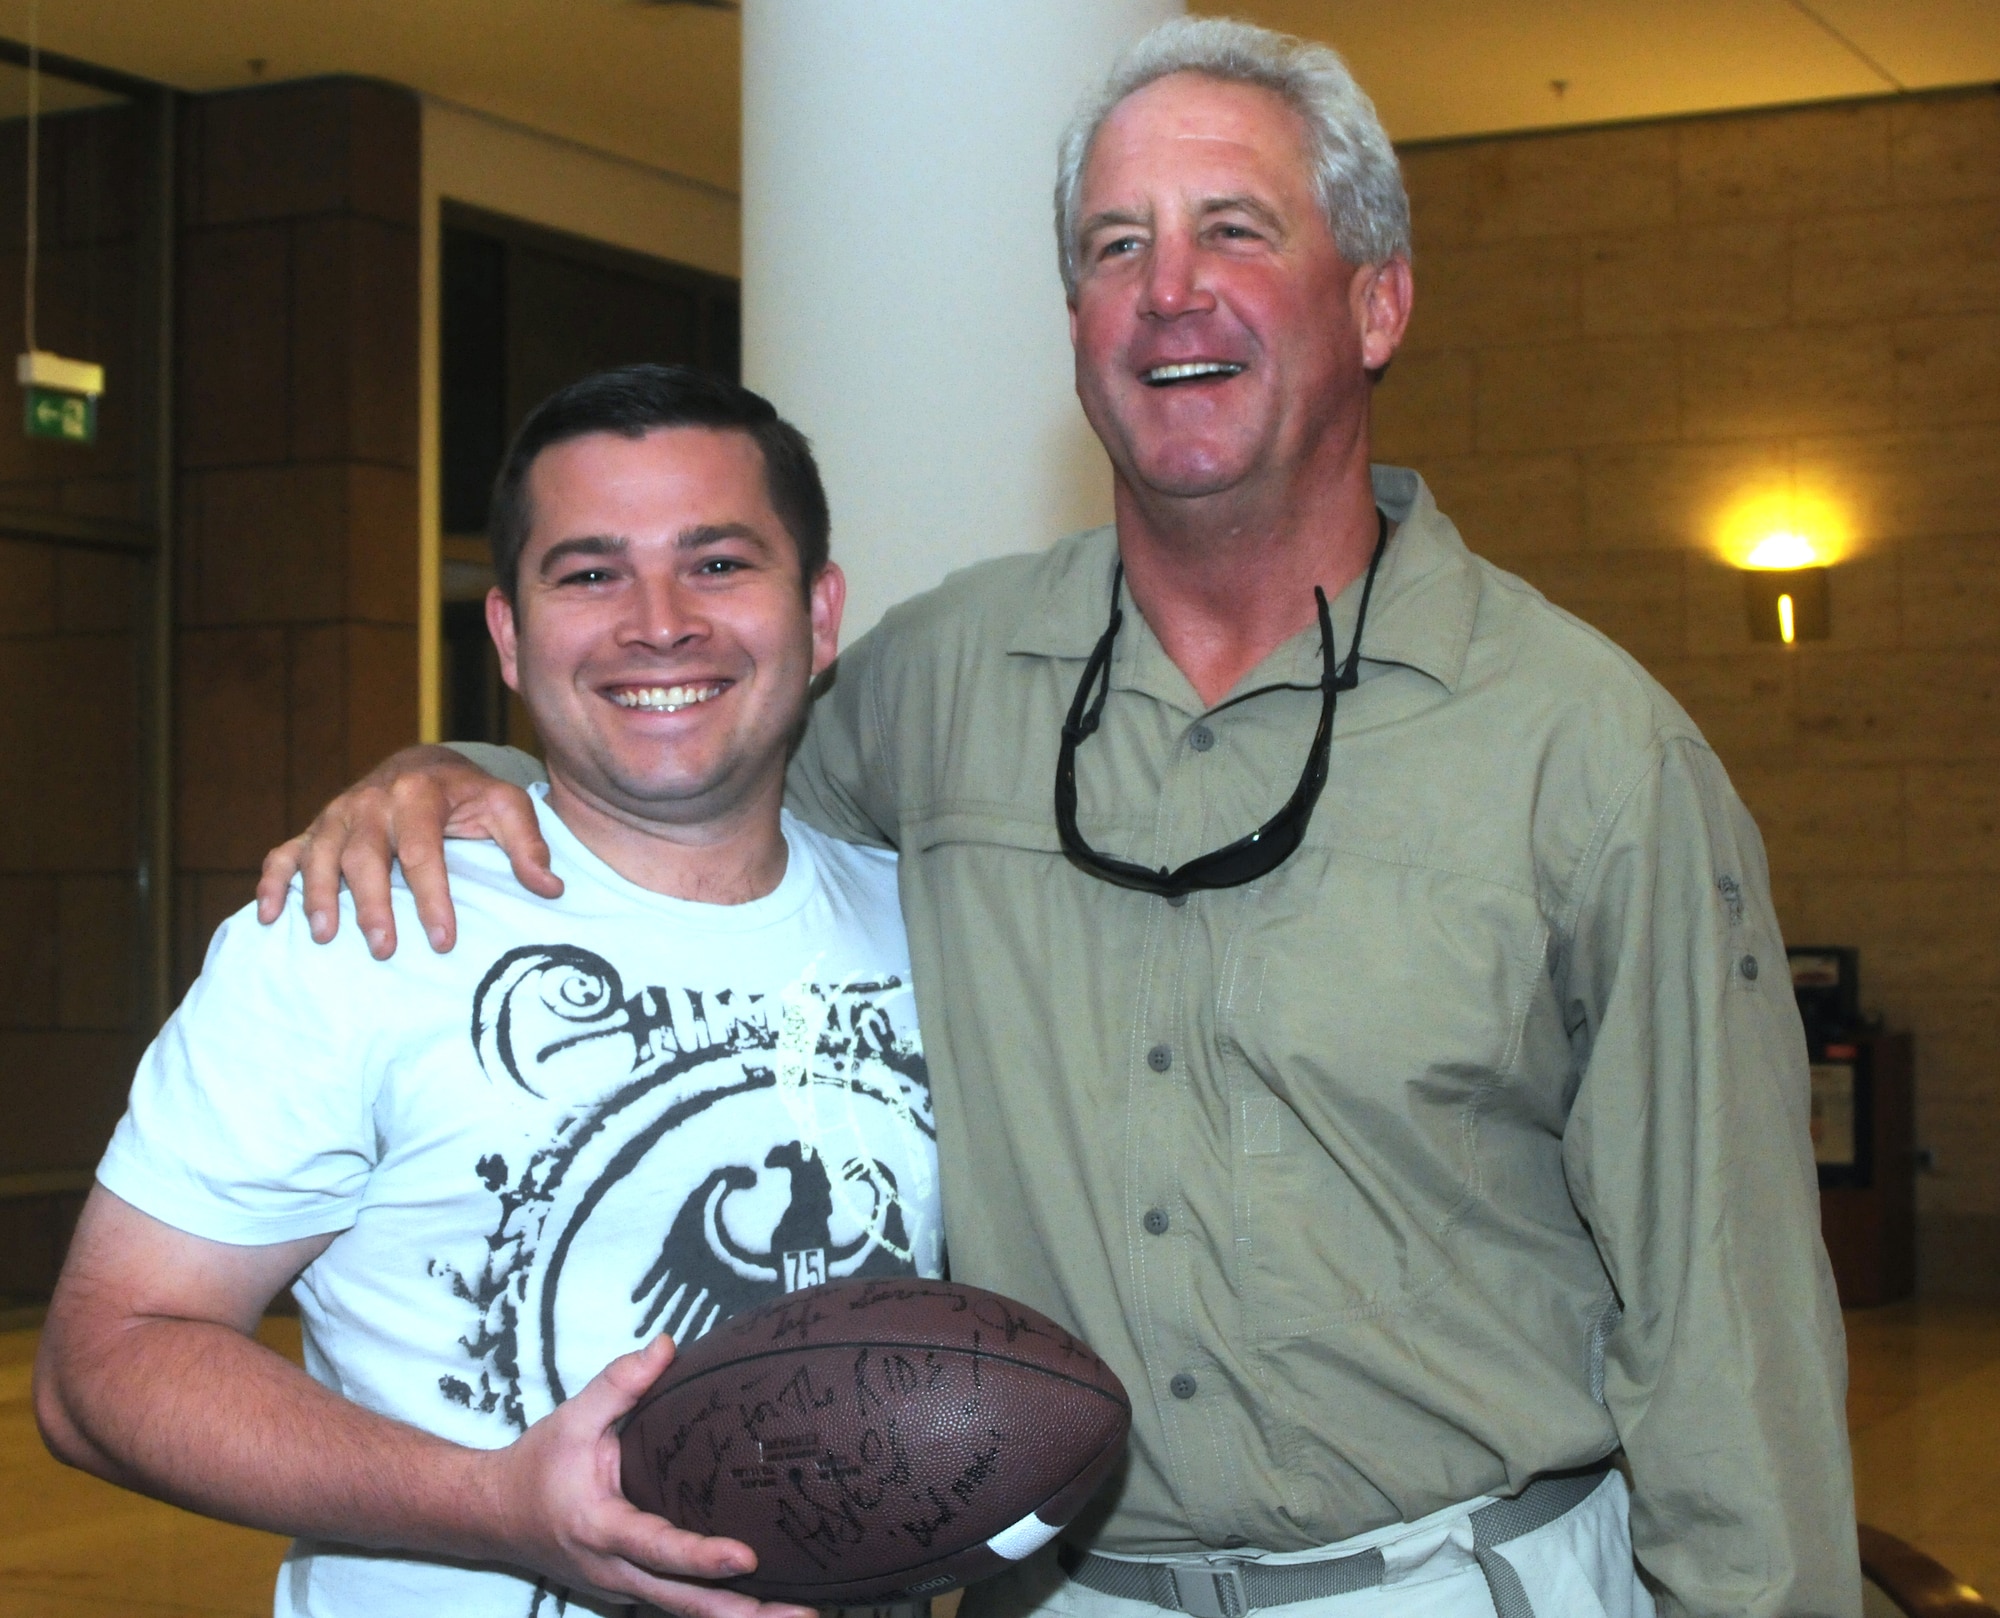 Coach John Fox, Carolina Panthers head coach, stops to take a photo after signing a football for Capt. Lawrence Dingler, a pilot with the 326th Airlift Squadron, Dover Air Force Base, Del., at the Eagles Rest Inn on Ramstein Air Base, Germany, July 1. The aircrew picked up the four National Football League coaches who were participating in the 2010 NFL-USO Coaches' tour. The crew was slated to transport the coaches to Bagram Air Base, Afghanistan. (U.S. Air Force photo/Senior Airman Andria J. Allmond)
